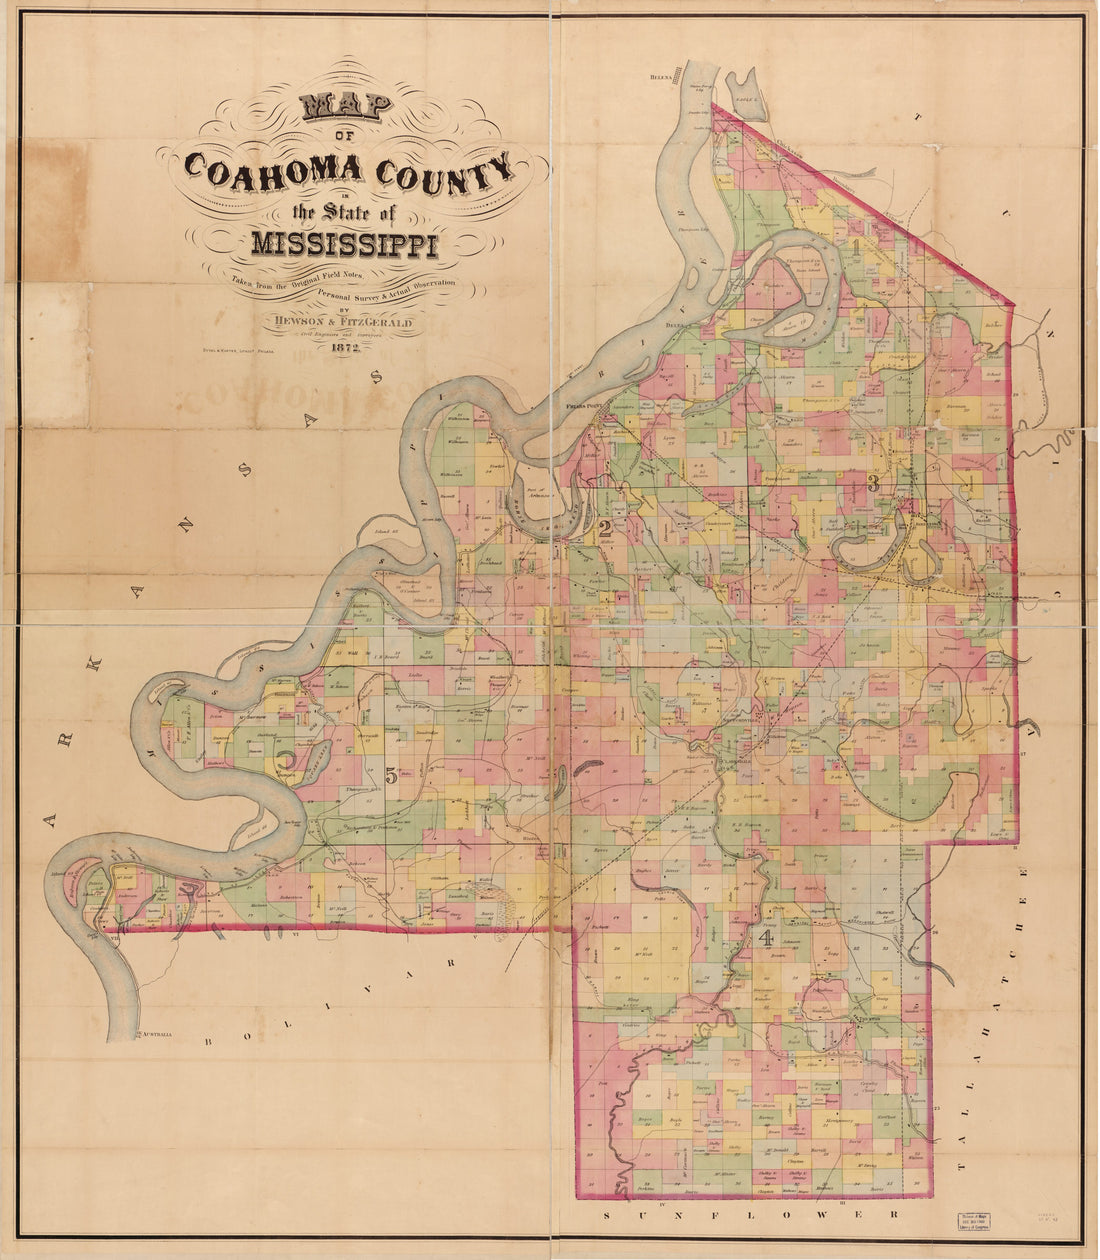 This old map of Map of Coahoma County In the State of Mississippi : Taken from the Original Field Notes, Personal Survey &amp; Actual Observations from 1872 was created by  Henson &amp; Fitzgerald in 1872